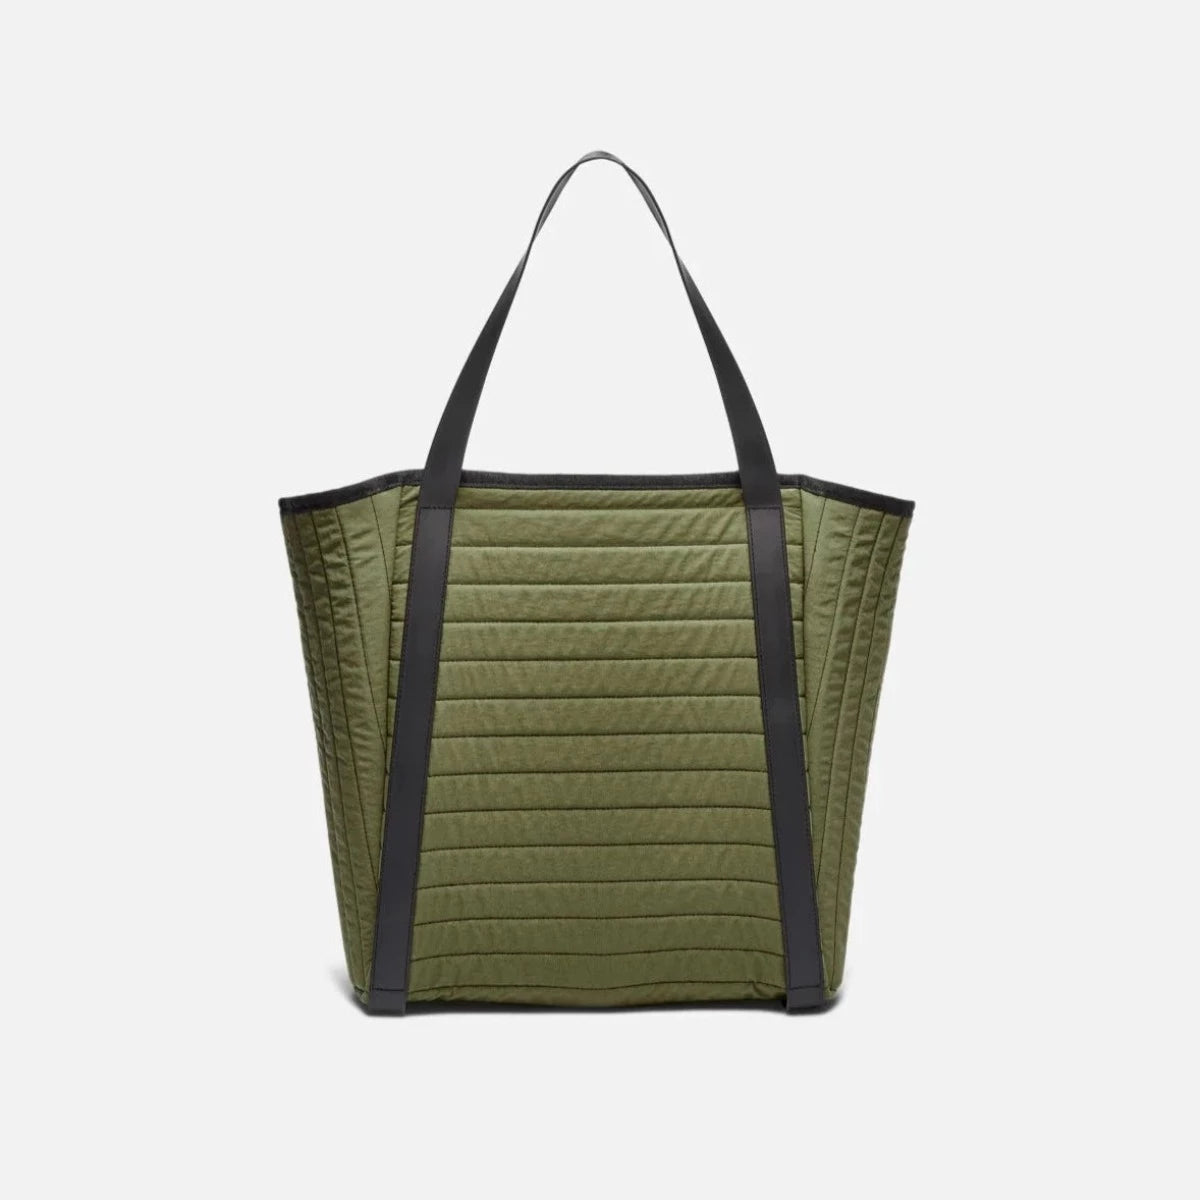 Arris Tote in Moss